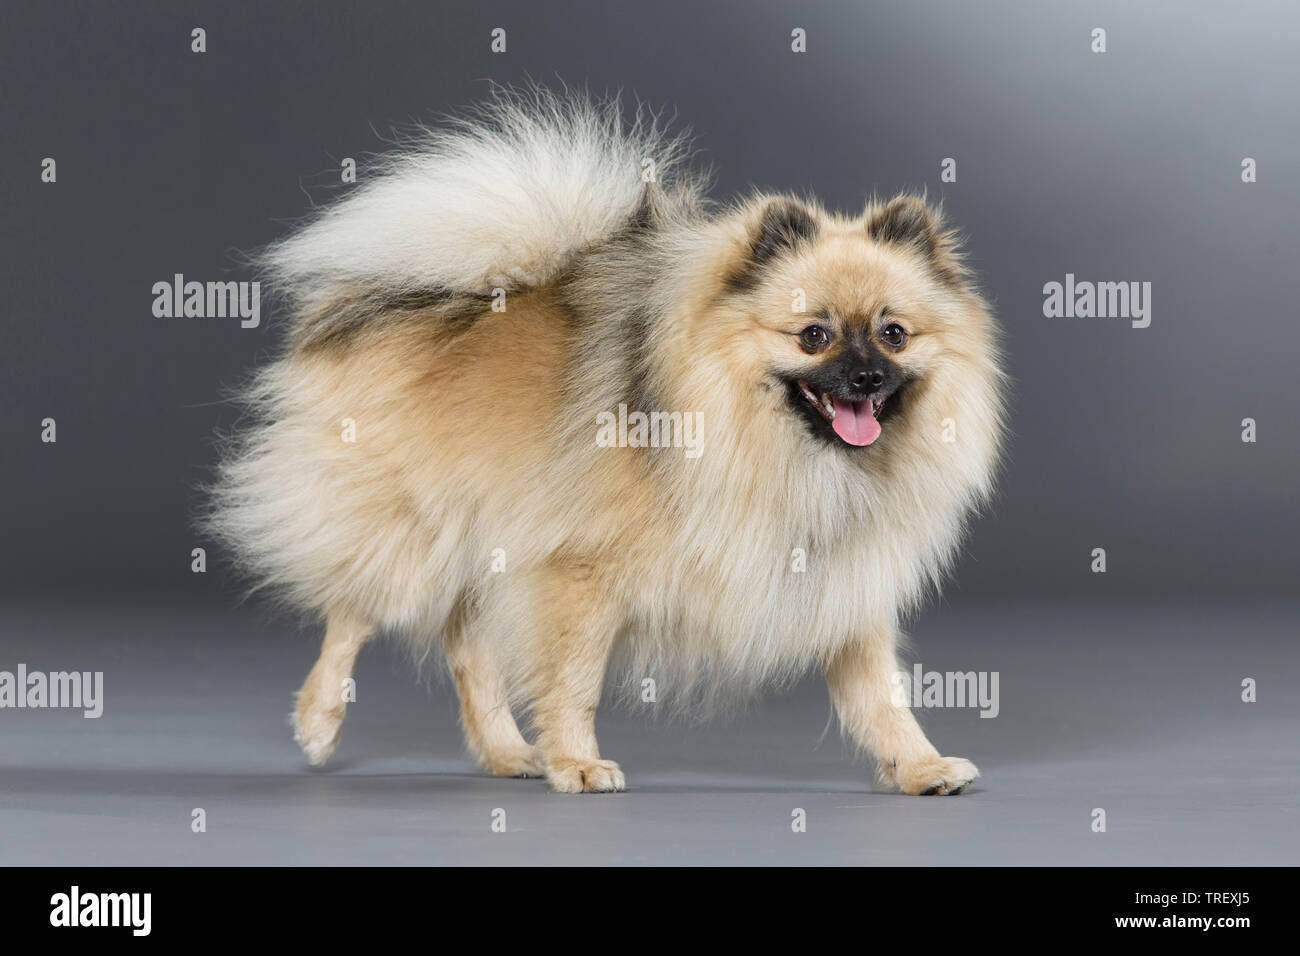 Pomeranian. Adult dog walking. Studio picture against a gray background. Germany Stock Photo